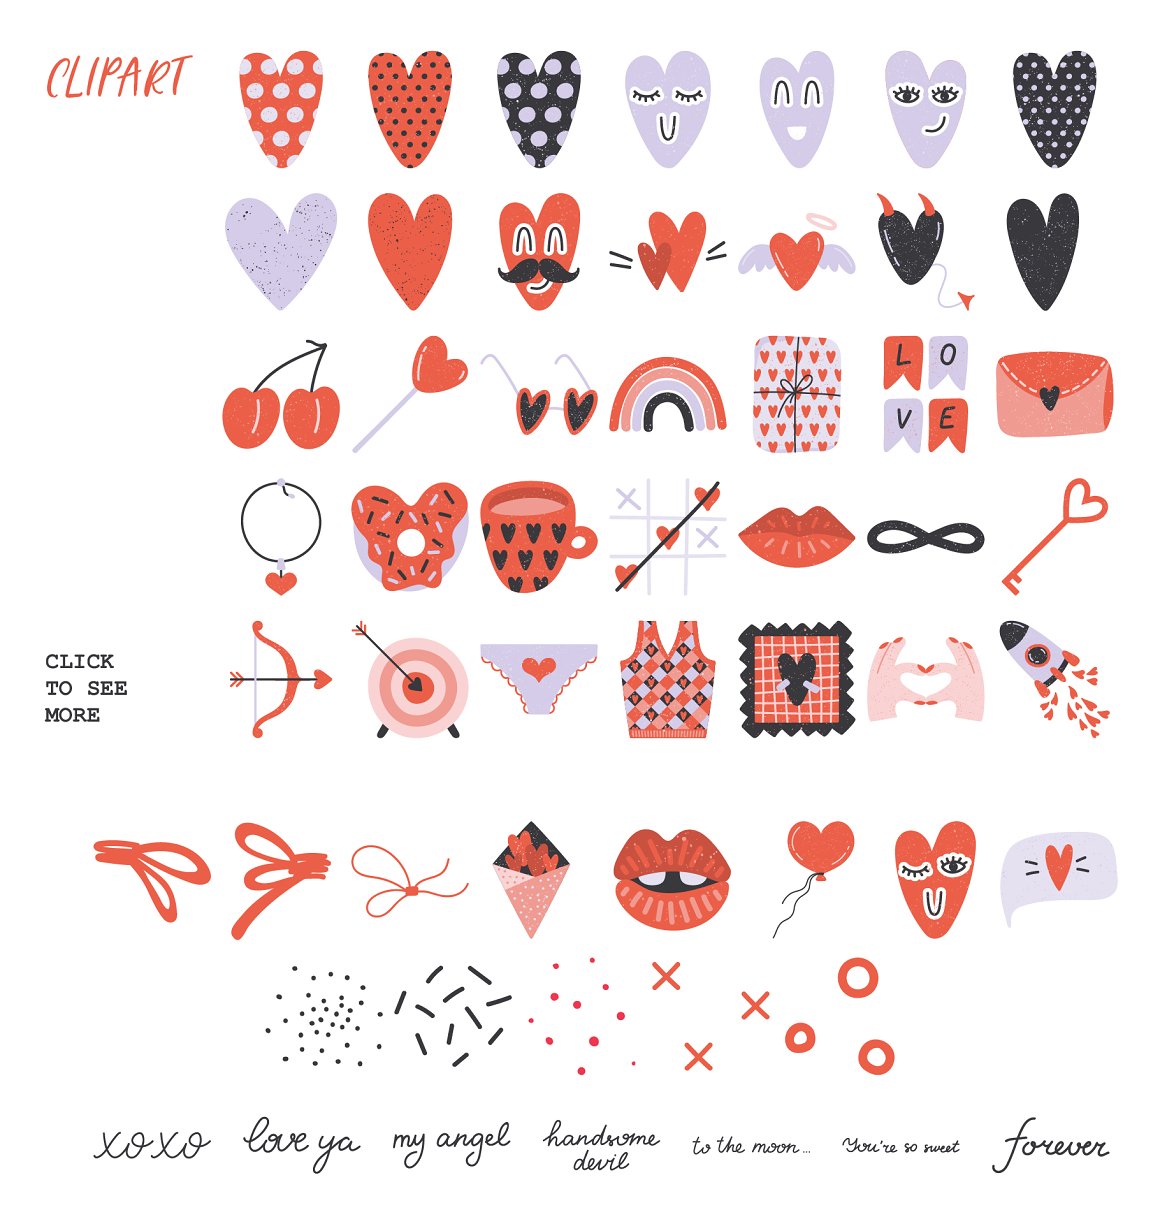 Clipart of different romantic elements in red, black and gray on a white background.